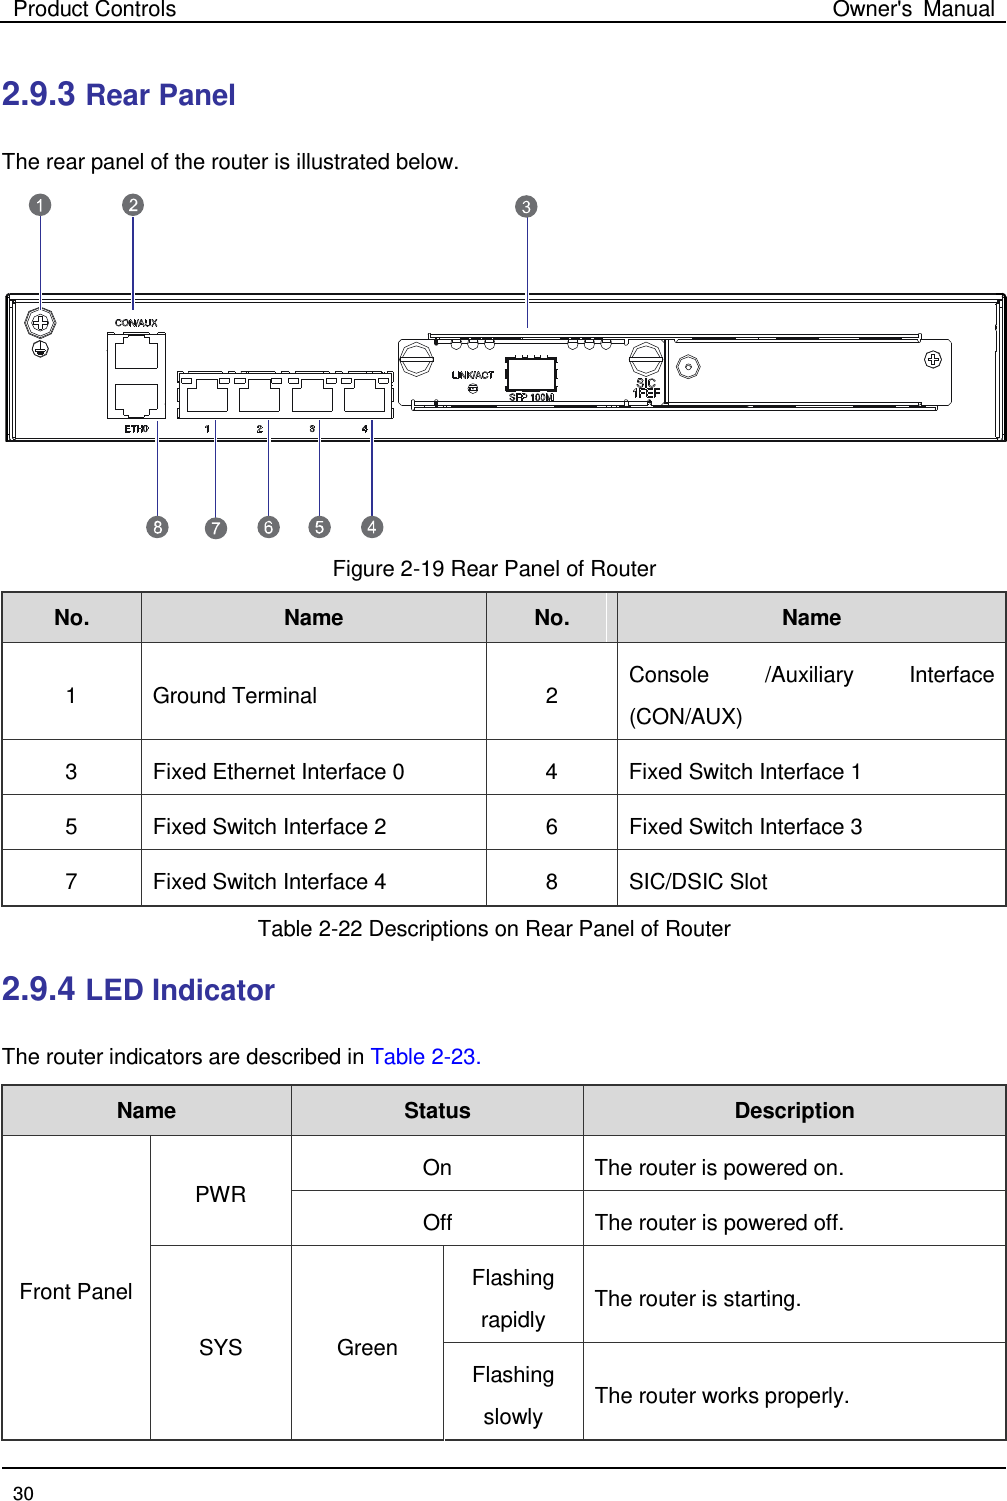 Product Controls Owner&apos;s Manual  30  2.9.3 Rear Panel The rear panel of the router is illustrated below.    Figure 2-19 Rear Panel of Router No. Name   No. Name   1  Ground Terminal  2 Console /Auxiliary Interface (CON/AUX) 3  Fixed Ethernet Interface 0  4  Fixed Switch Interface 1 5  Fixed Switch Interface 2  6  Fixed Switch Interface 3 7  Fixed Switch Interface 4  8  SIC/DSIC Slot Table 2-22 Descriptions on Rear Panel of Router 2.9.4 LED Indicator The router indicators are described in Table 2-23. Name   Status Description   Front Panel PWR On   The router is powered on. Off The router is powered off.   SYS Green Flashing rapidly The router is starting. Flashing slowly The router works properly. 